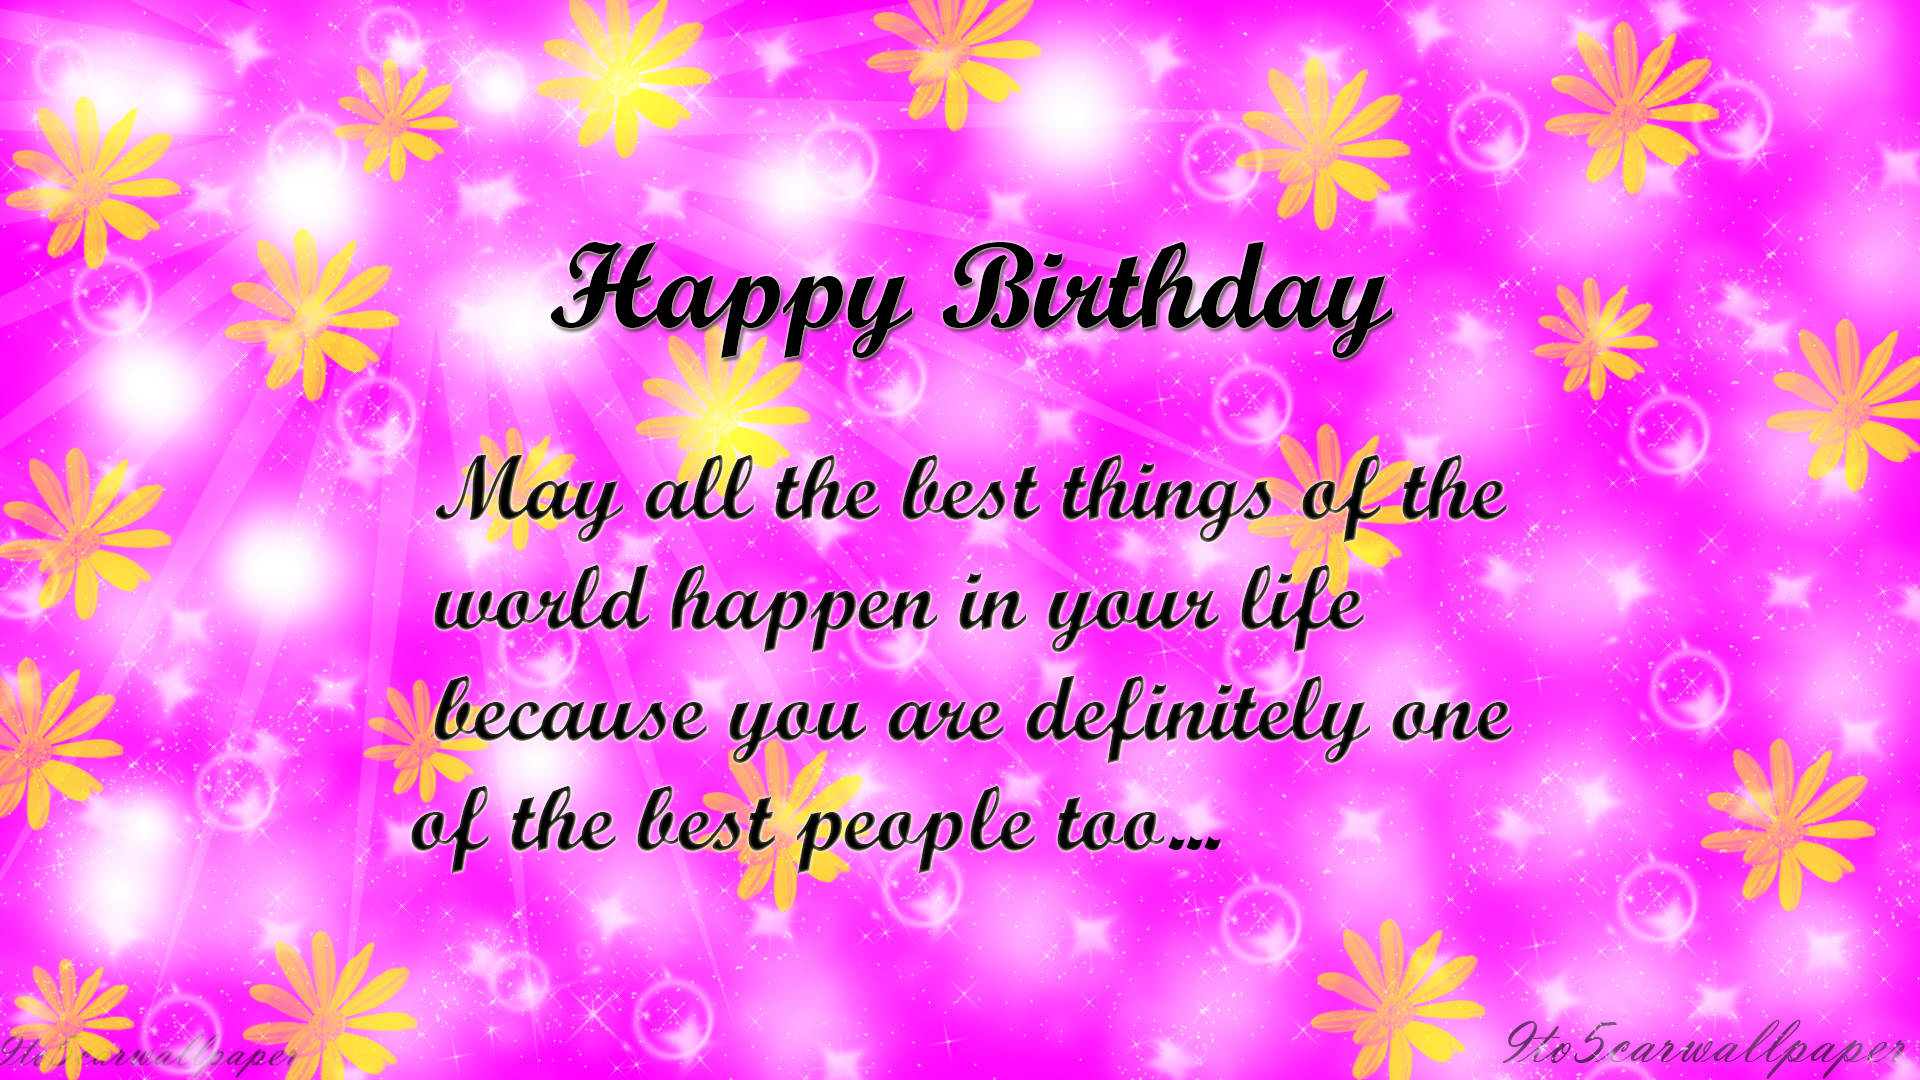 Birthday Greetings Quotes - Birthday Cards